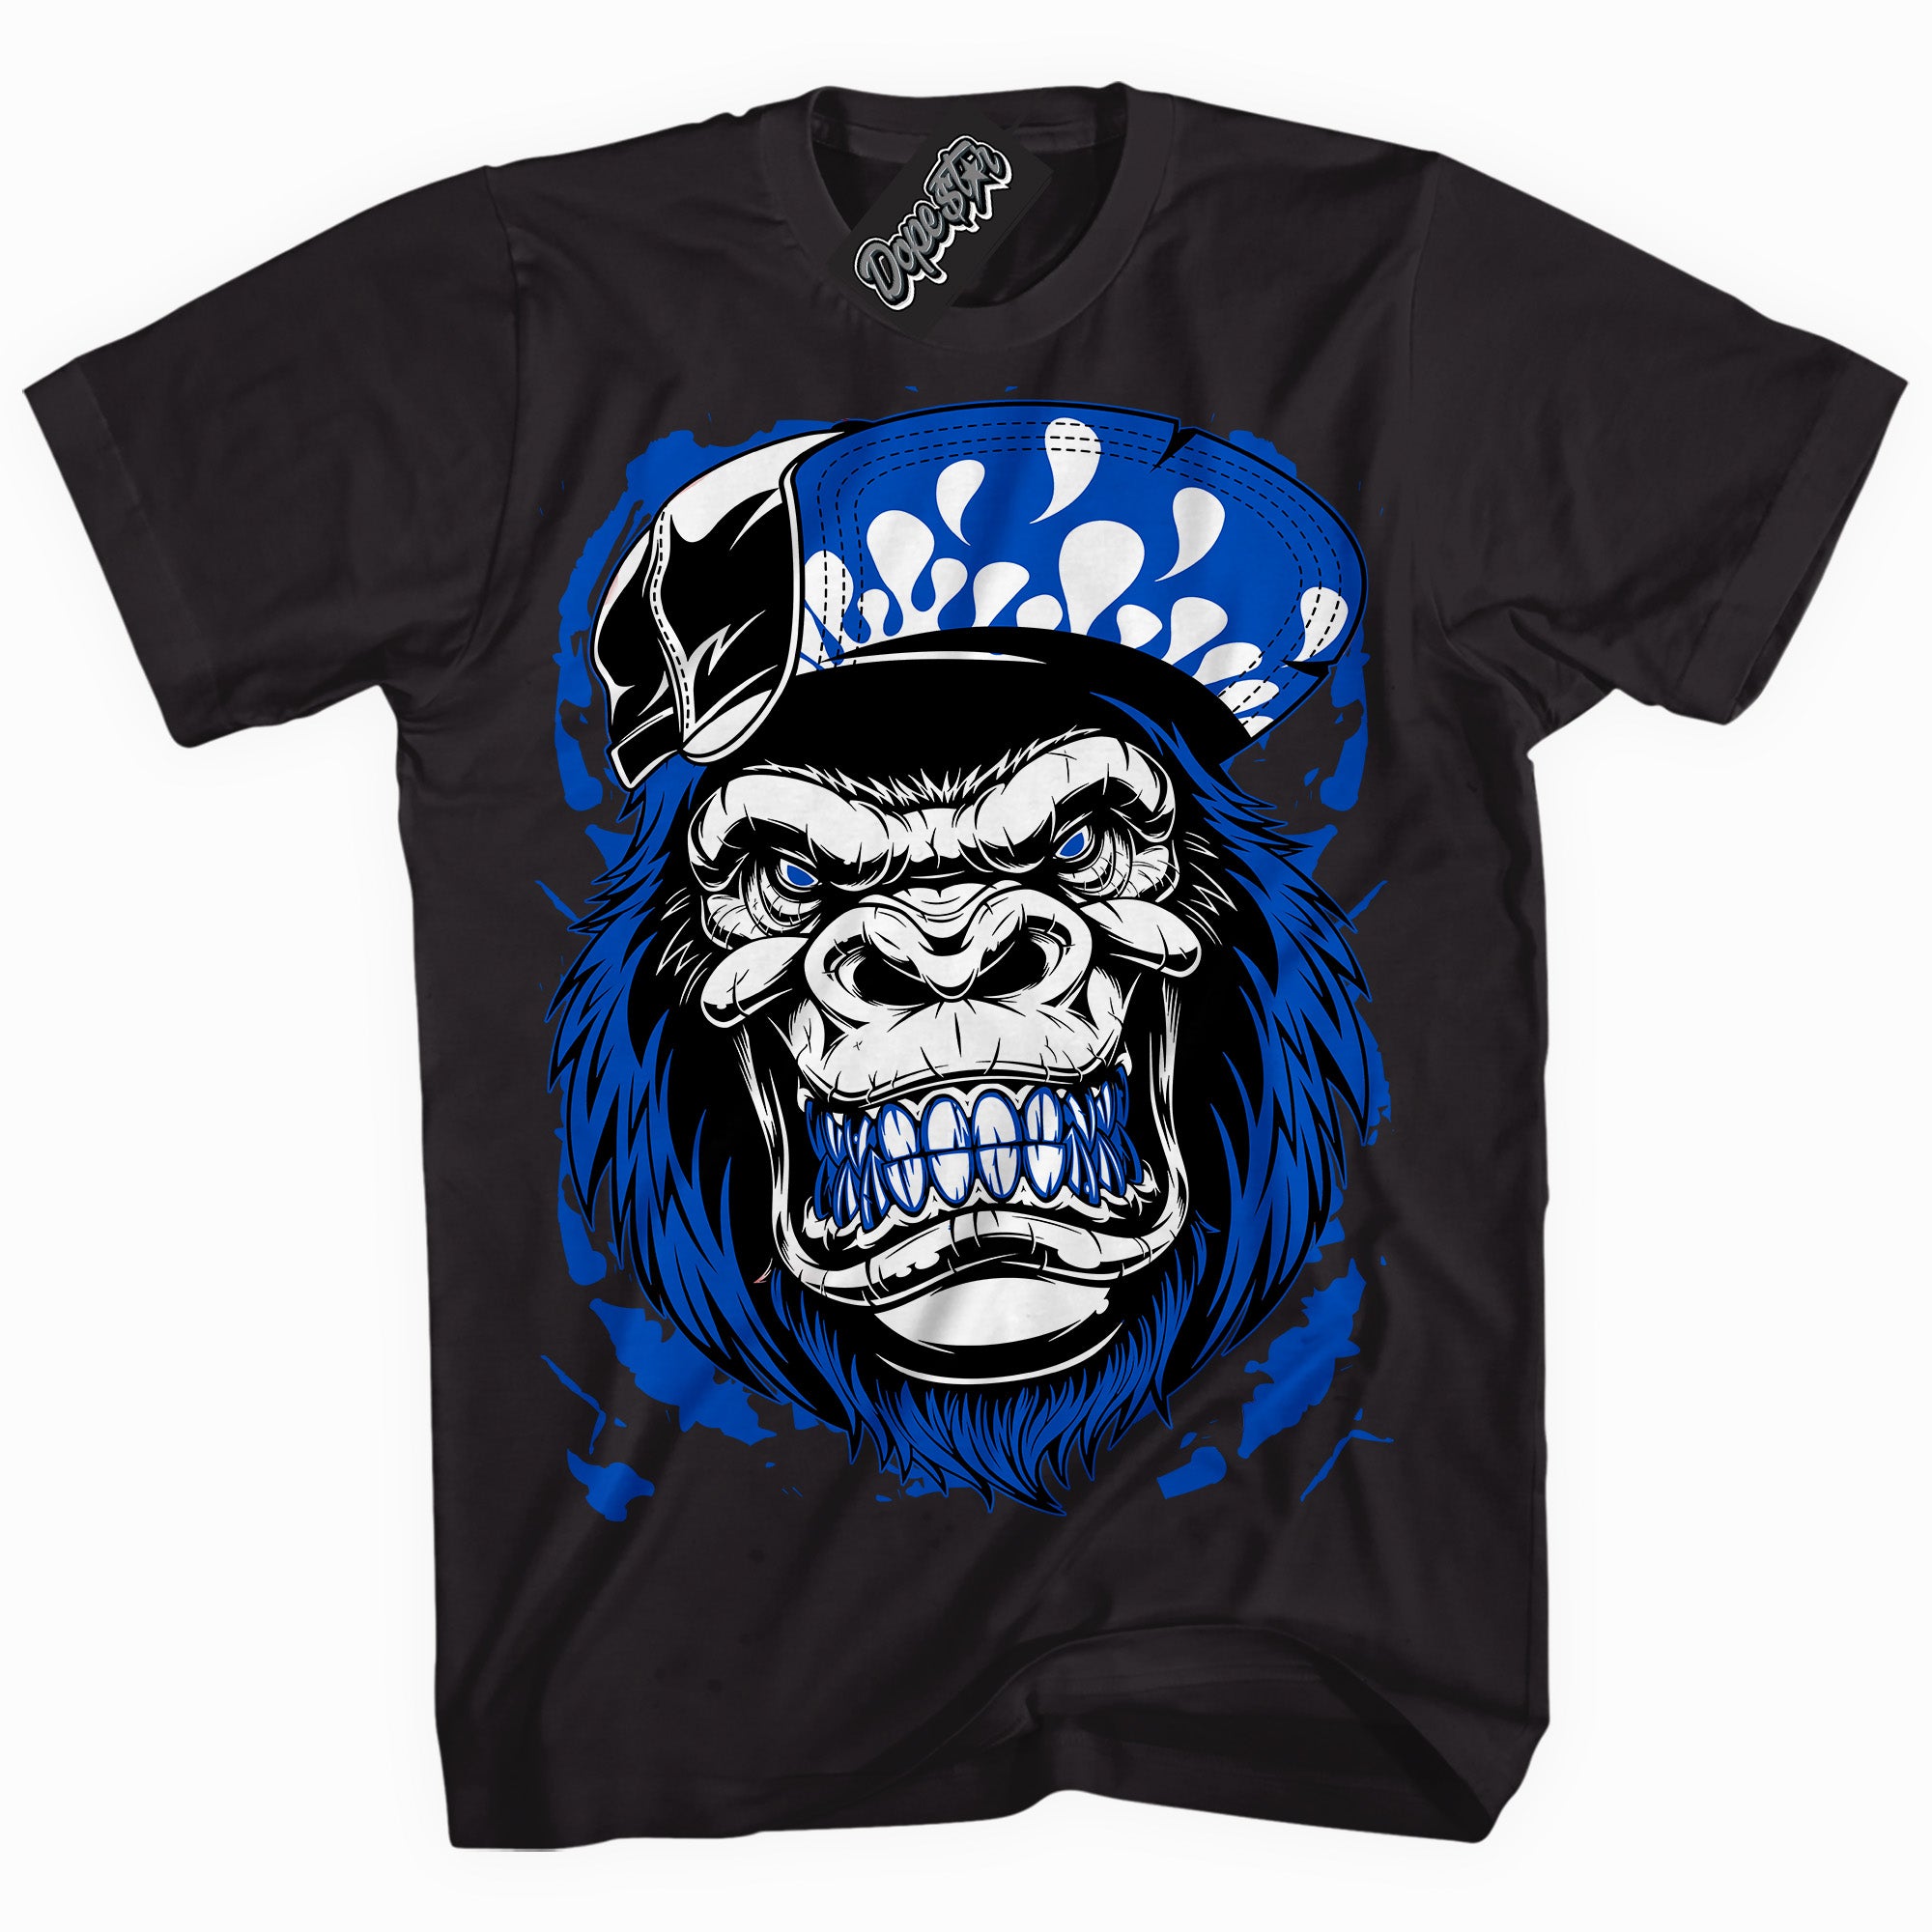 Cool Black graphic tee with " Gorilla Beast " design, that perfectly matches Royal Reimagined 1s sneakers 